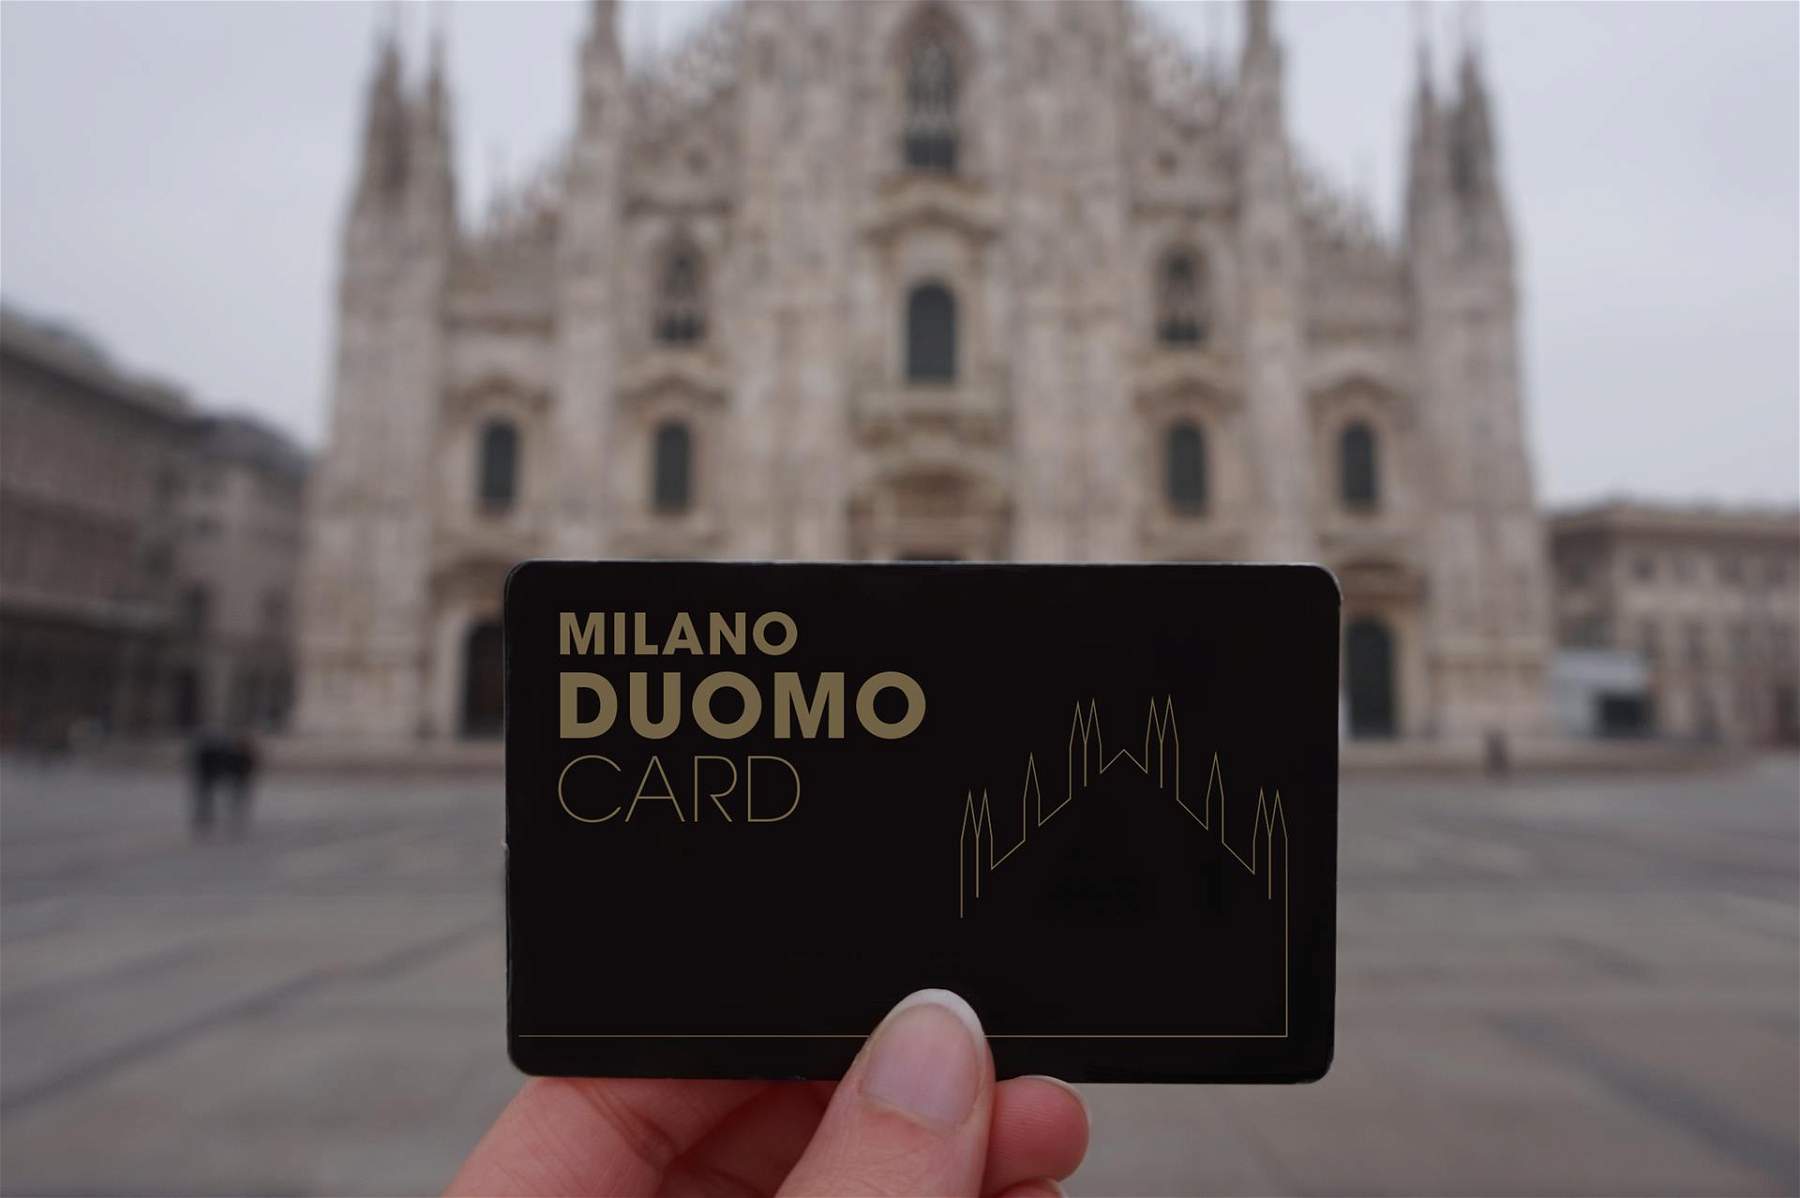 Milan Cathedral launches its card, aiming to support the monument